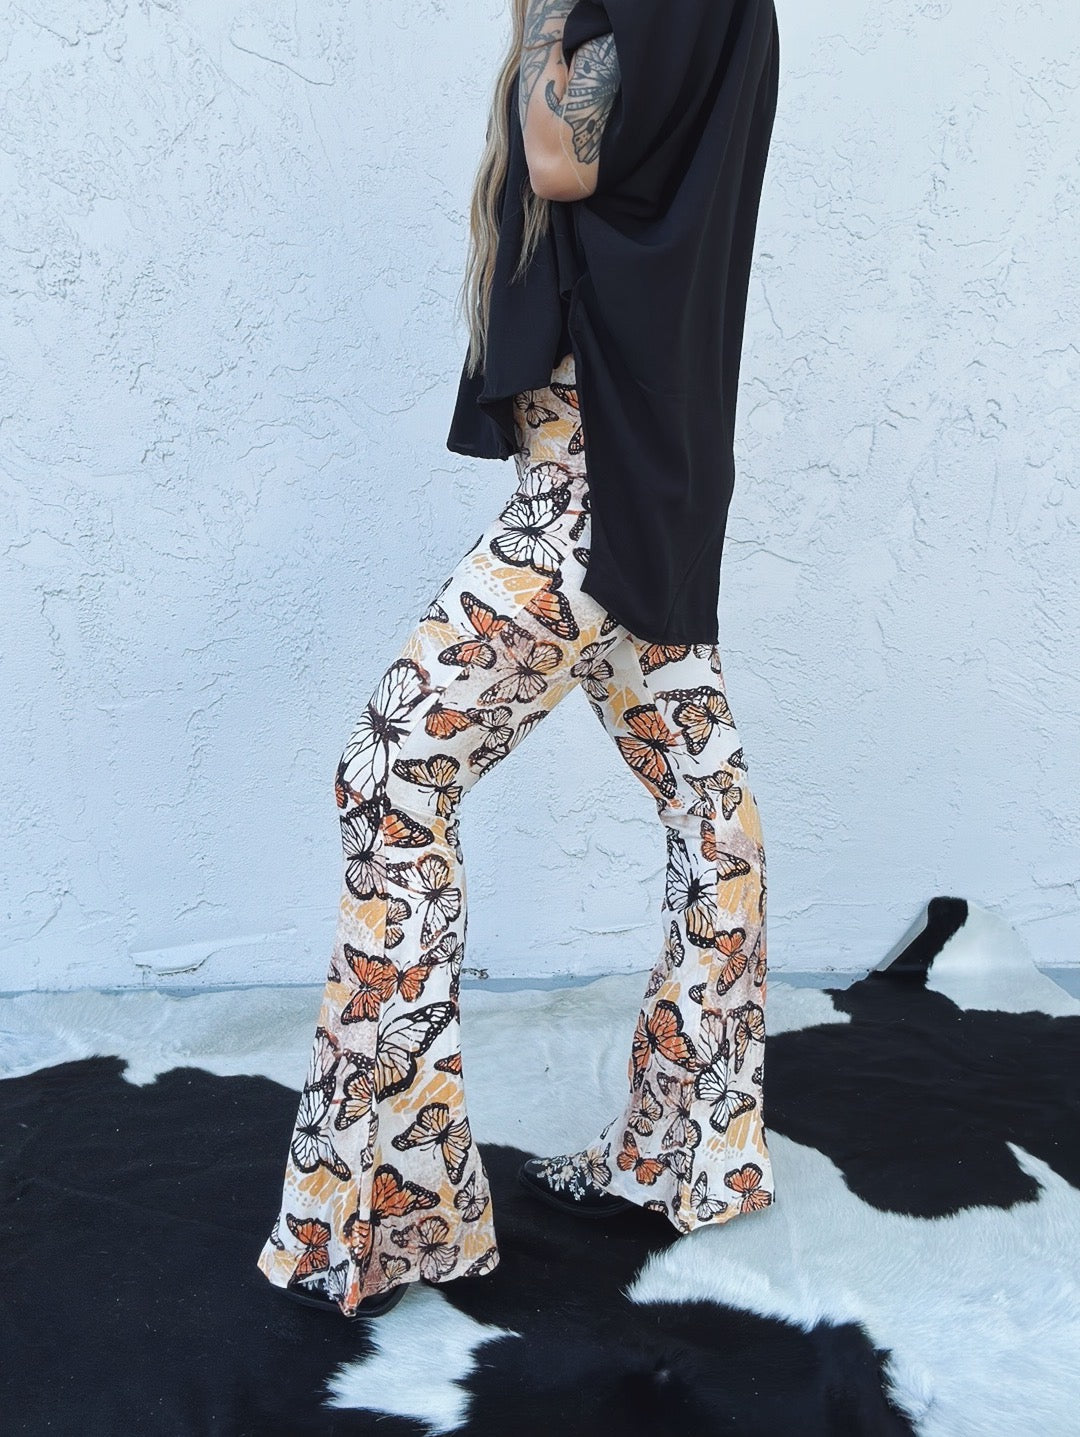 Come My Lady Monarch Butterfly Print Bell Bottom Flare Pants